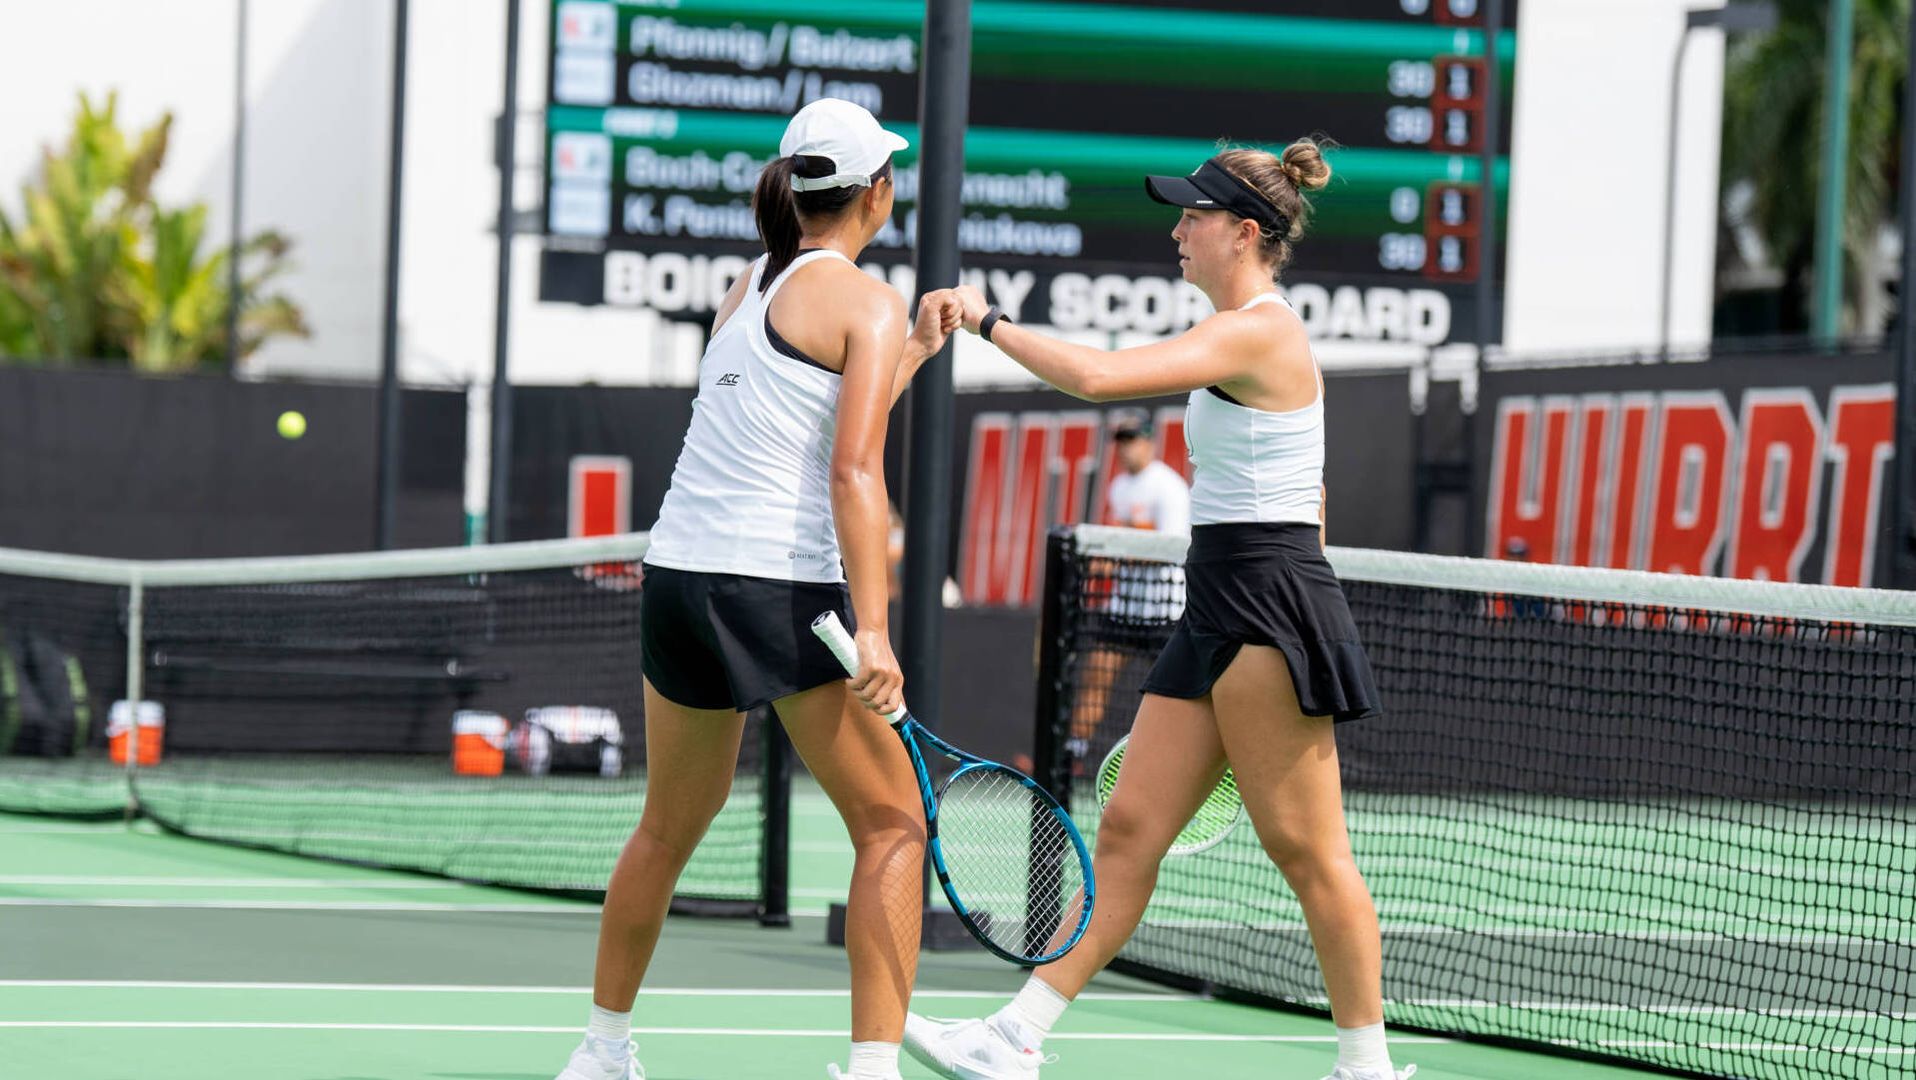 Miami Downs USA Junior Fed Cup Team in Exhibition